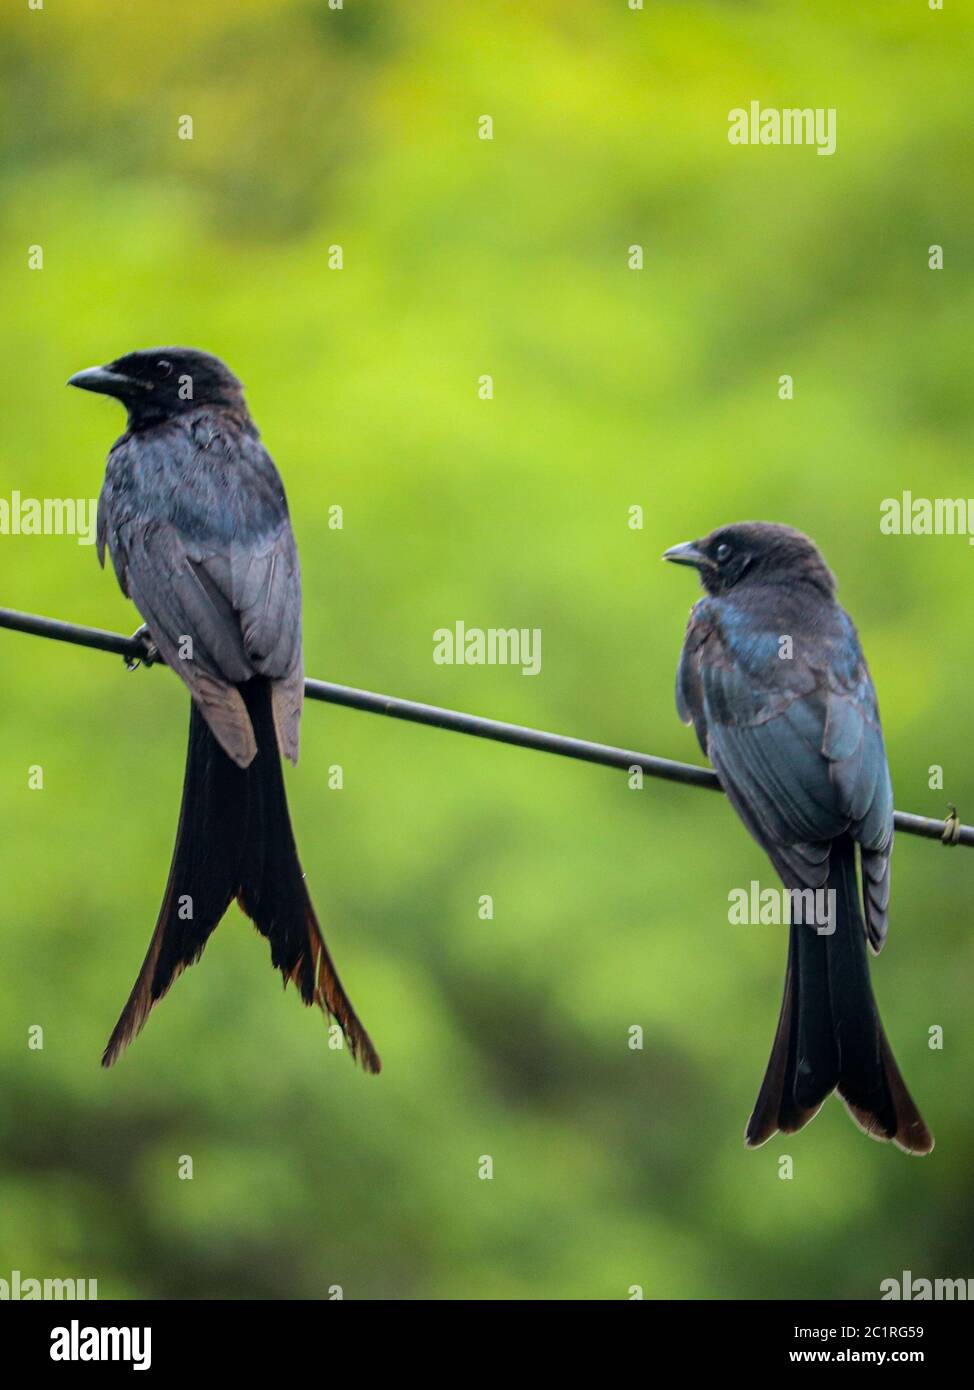 Pair Purple Martin birds in a Rope. Selective focus. Shallow depth of field. Background blur. Stock Photo